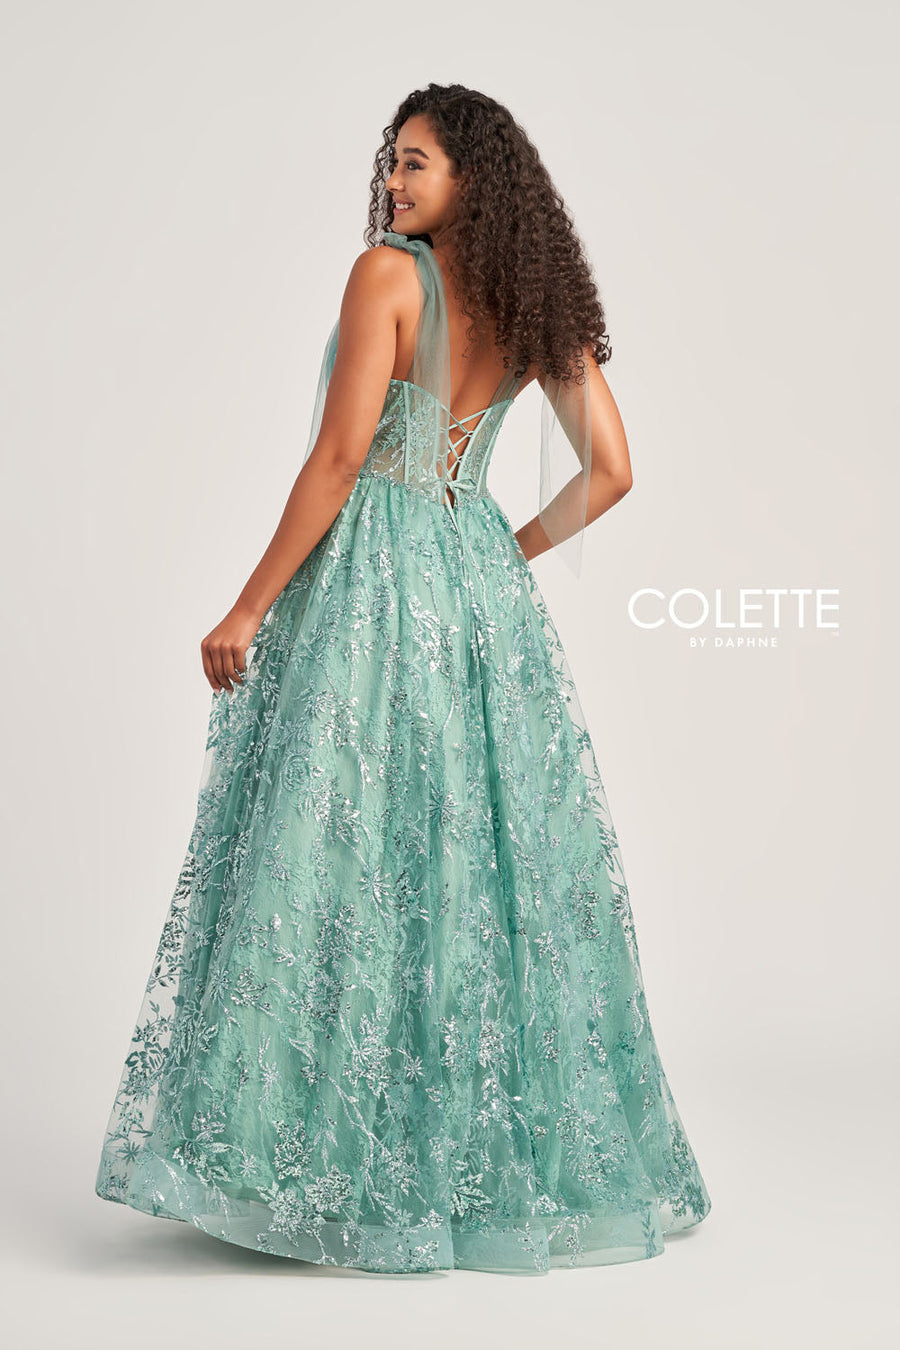 Colette CL5236 prom dress images.  Colette CL5236 is available in these colors: Sage.